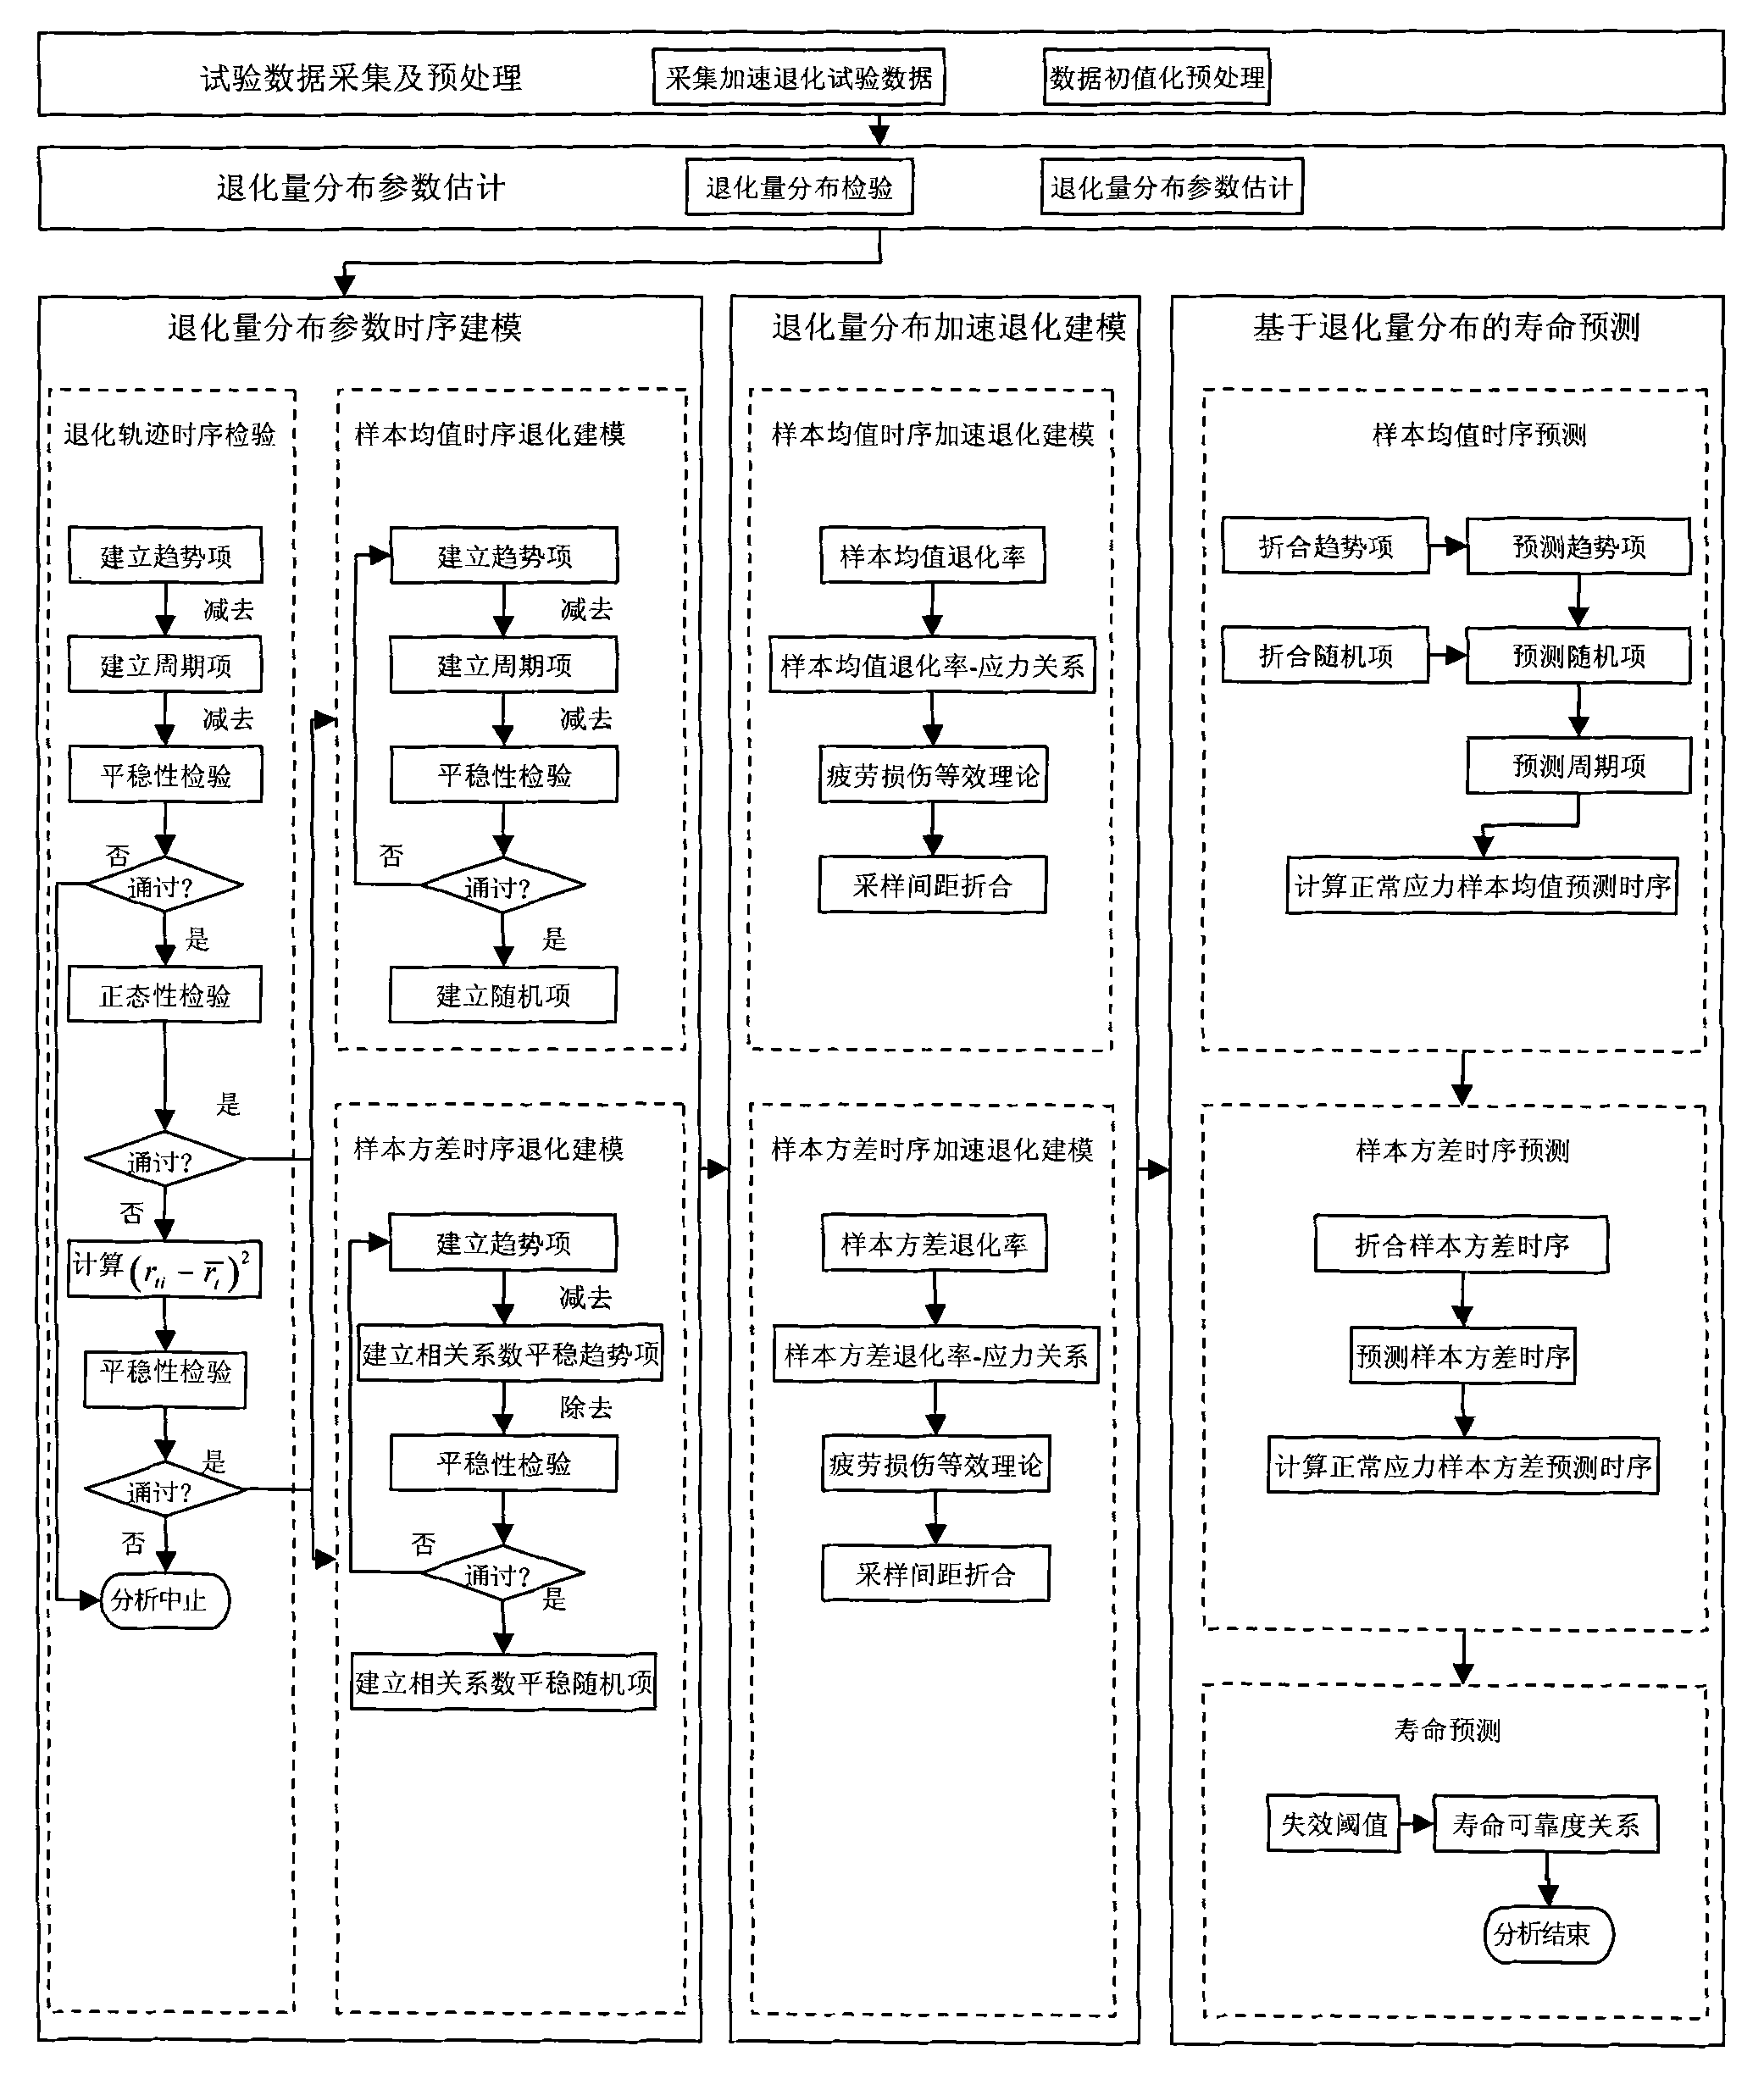 Method for predicting service life of product by accelerated degradation testing based on degenerate distribution non-stationary time series analysis